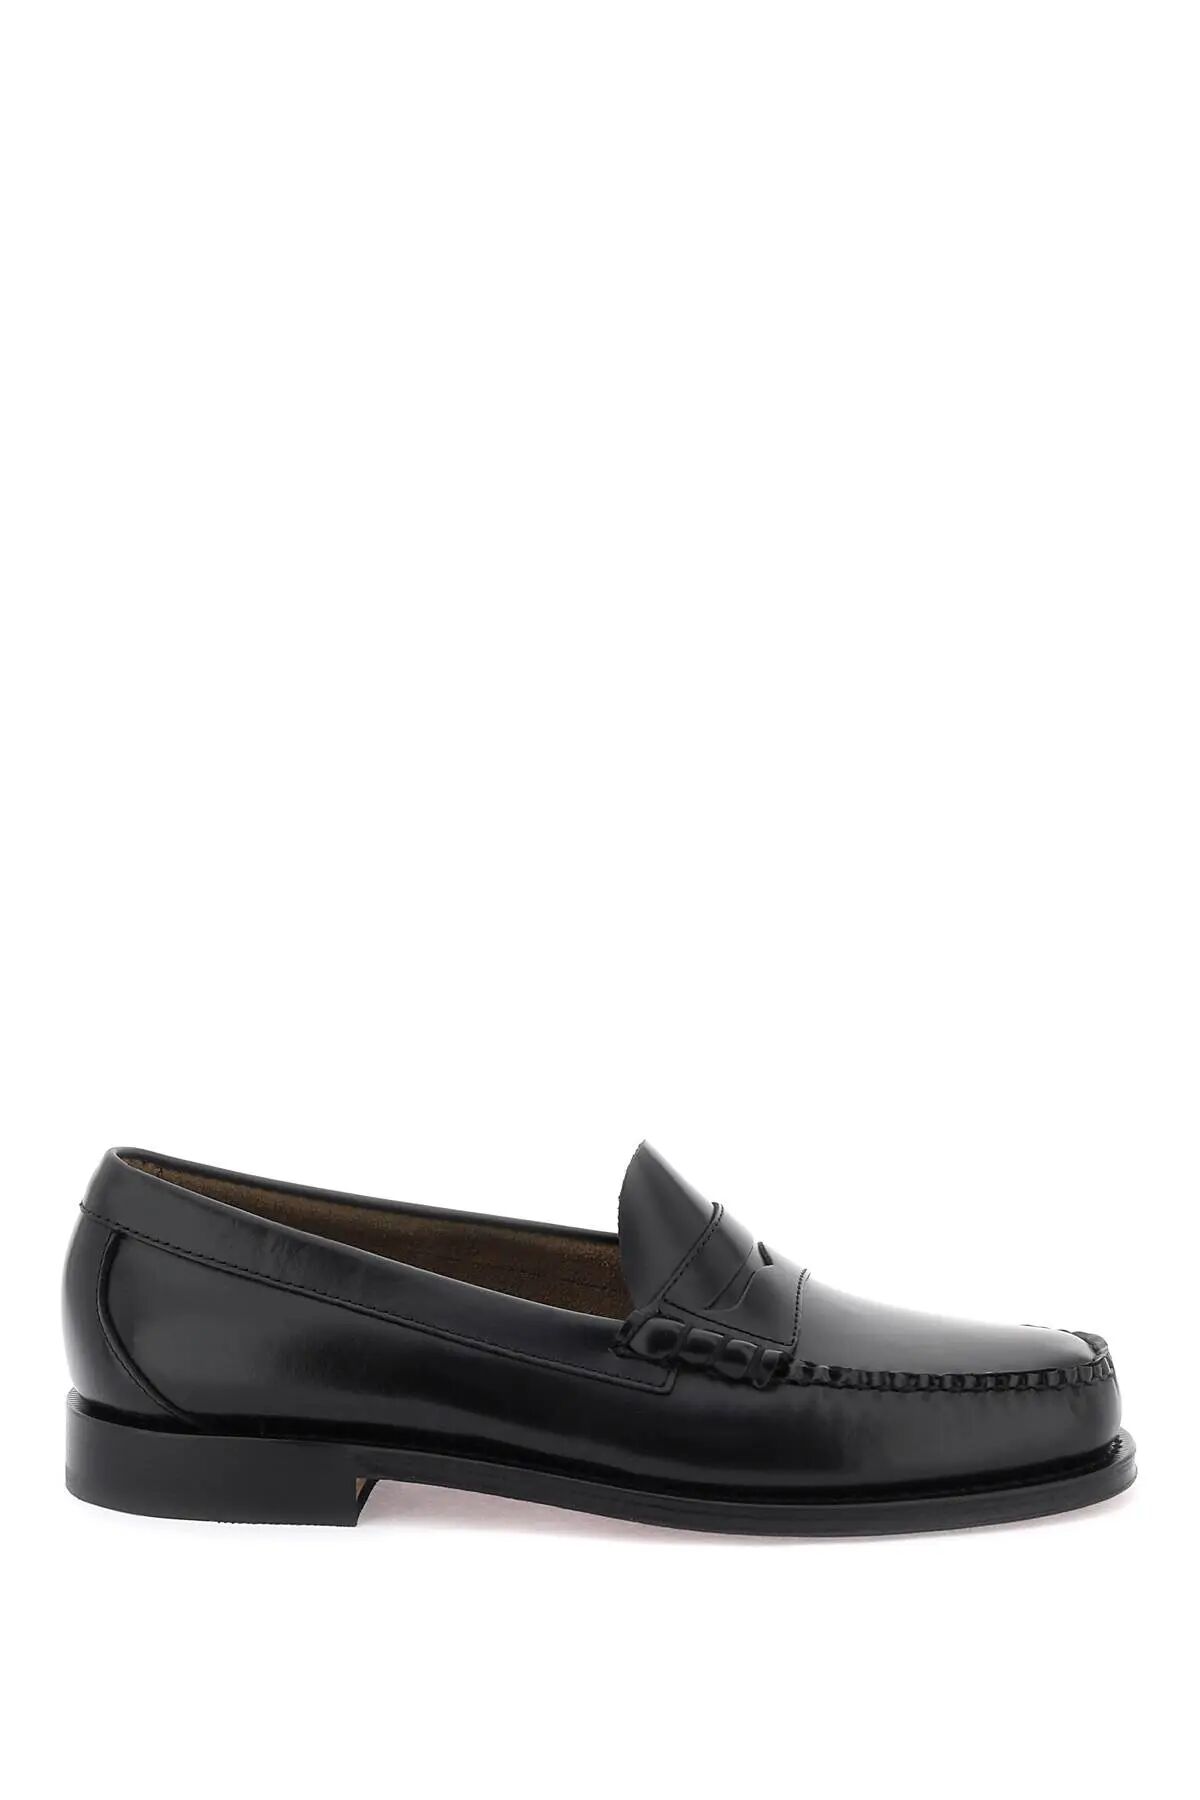 G.H. BASS 'Weejuns Larson' penny loafers  - Black - male - Size: 44,5